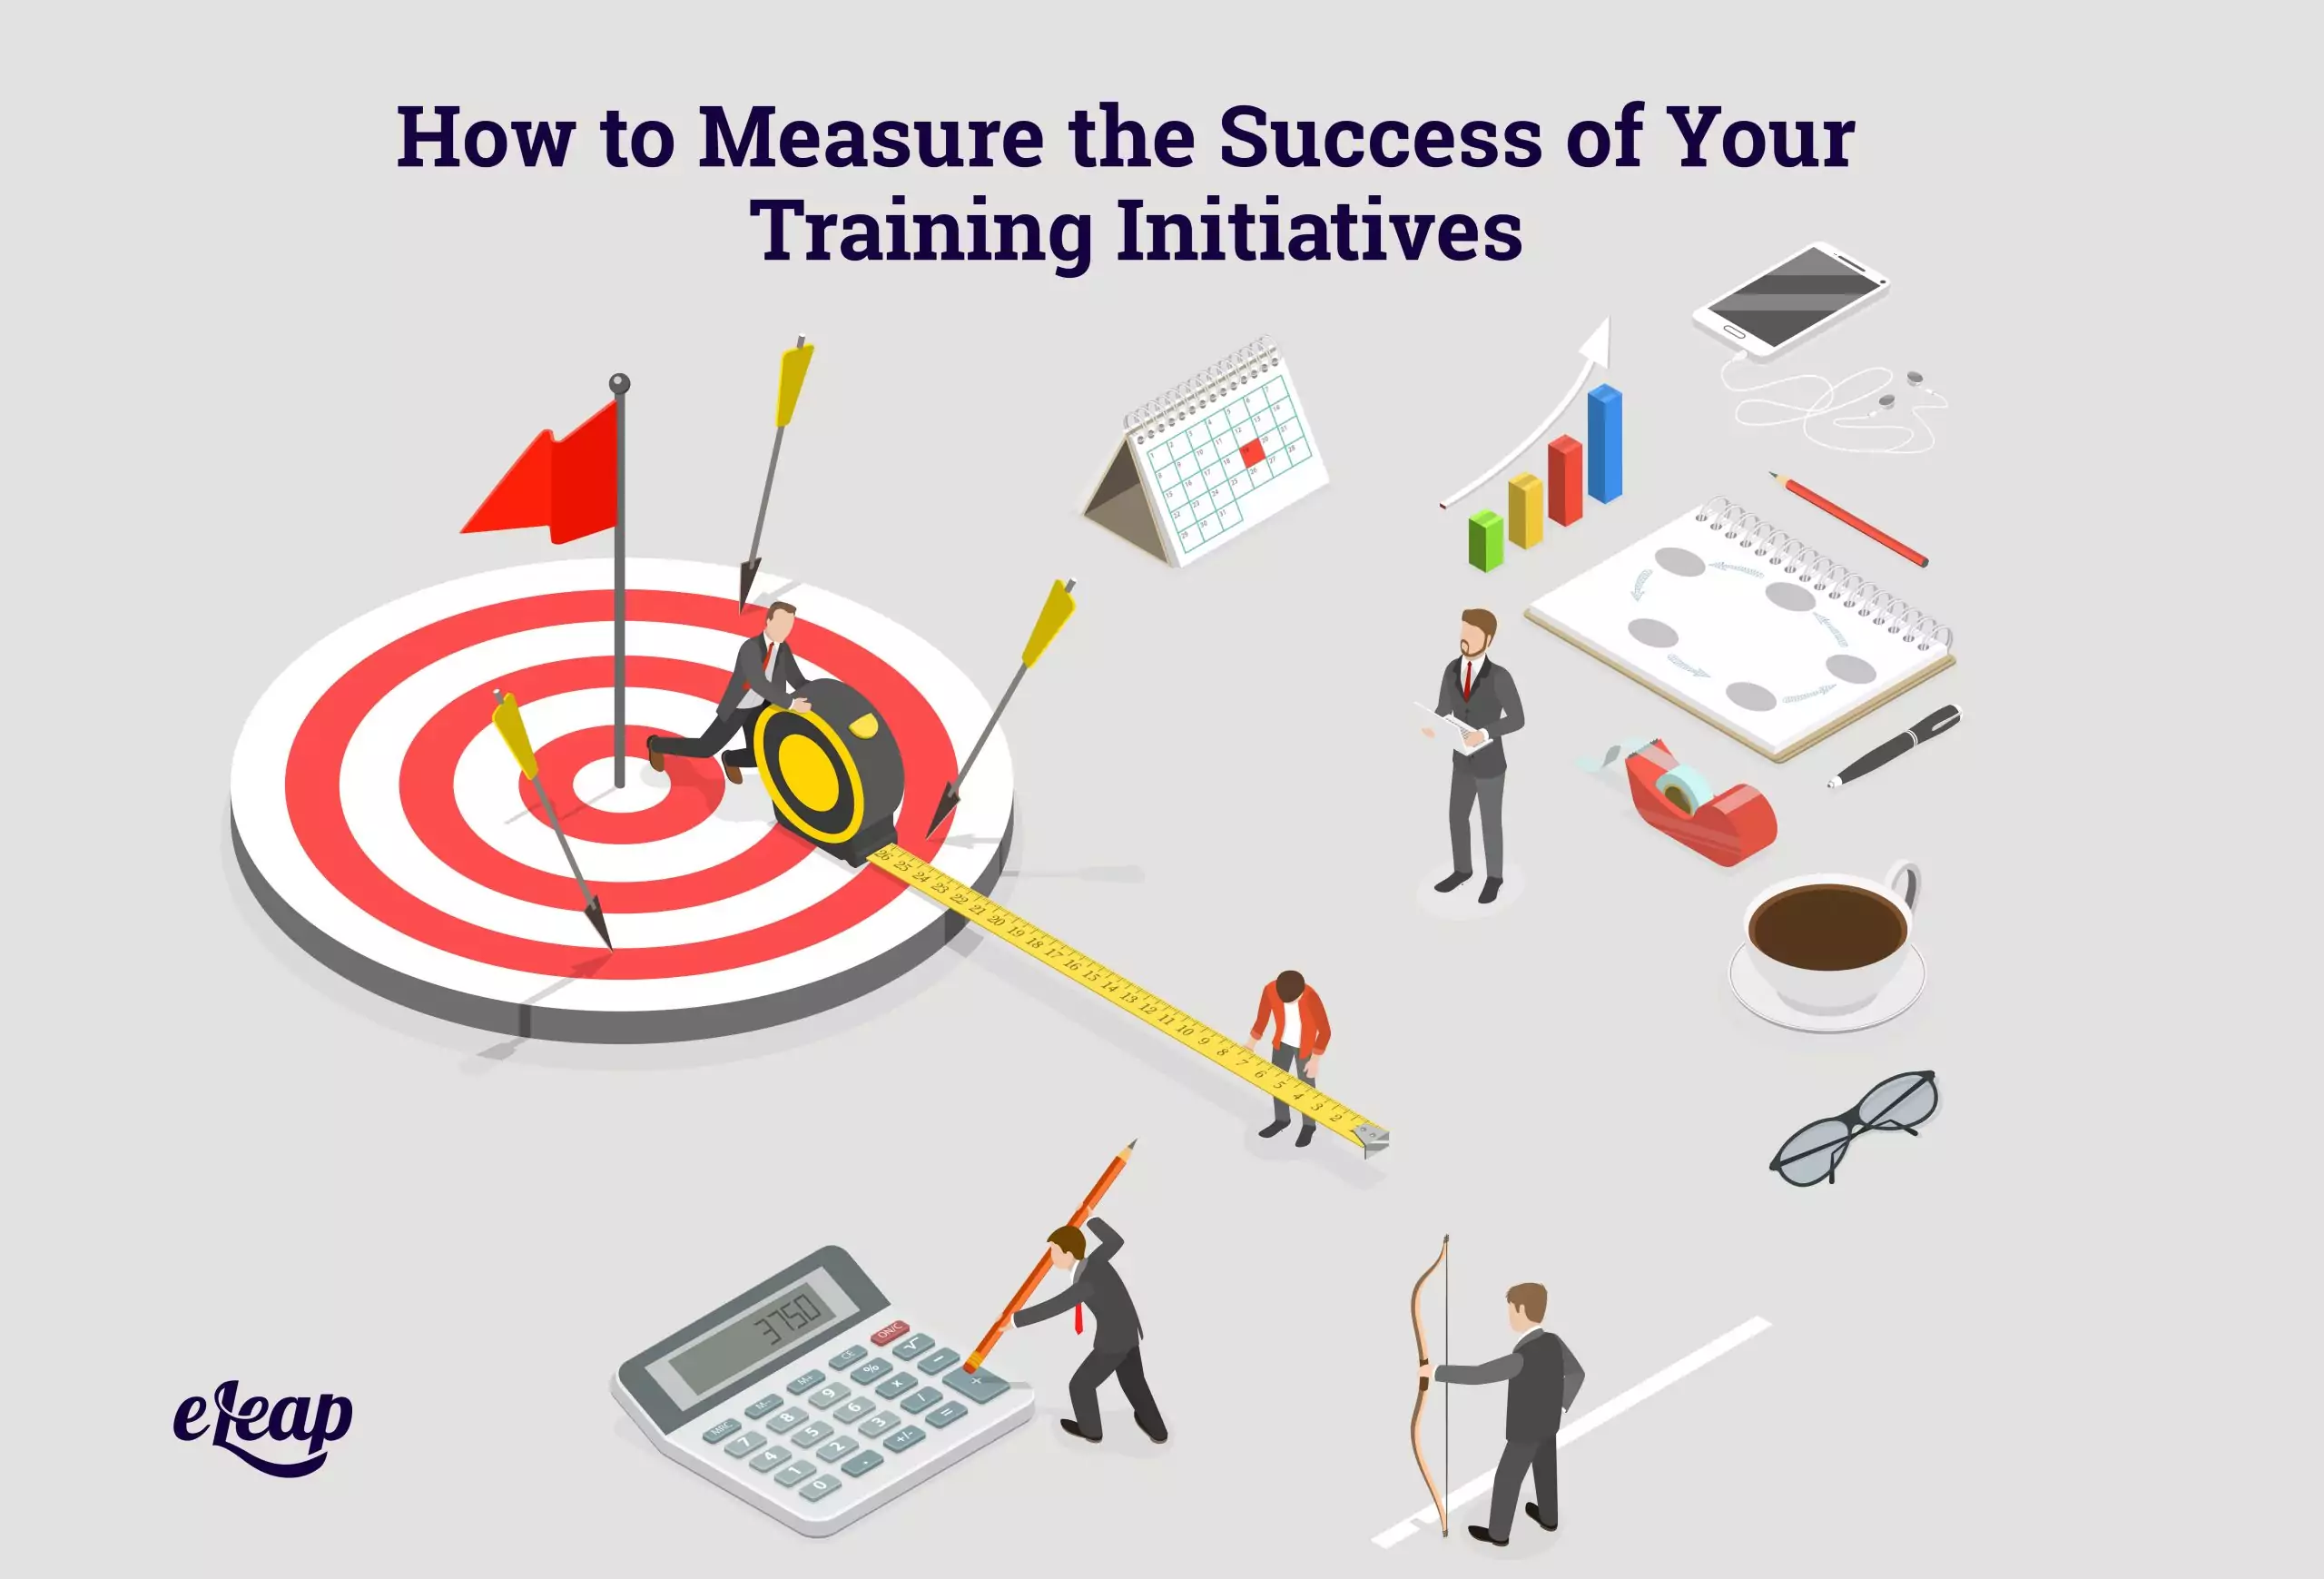 How to Measure the Success of Your Training Initiatives